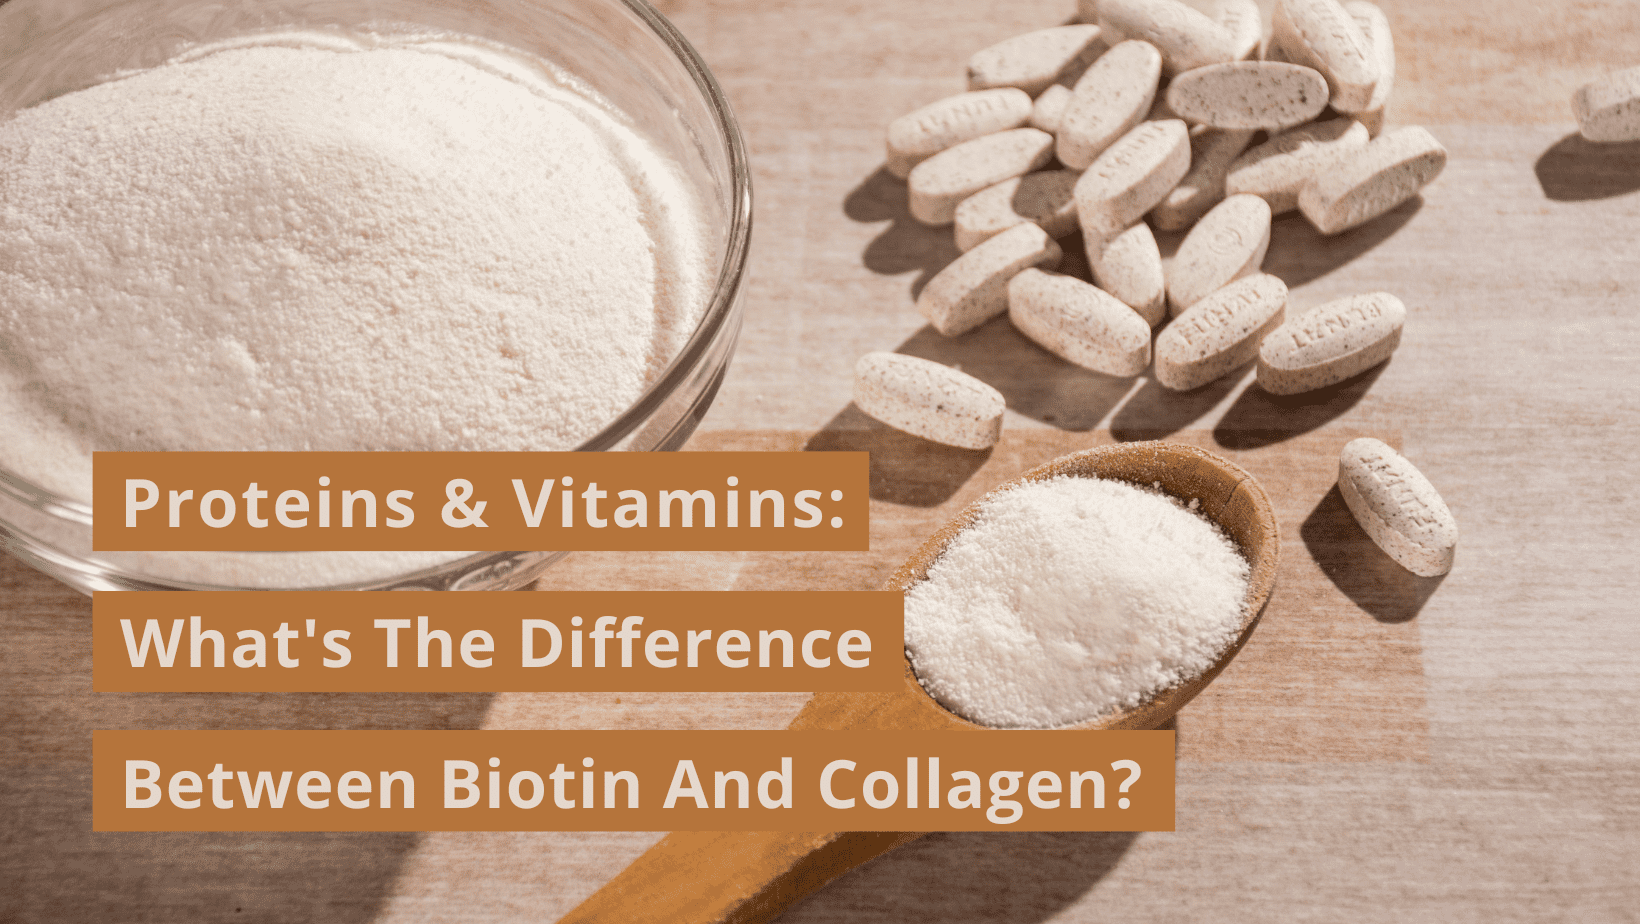 what's the difference between biotin and collagen